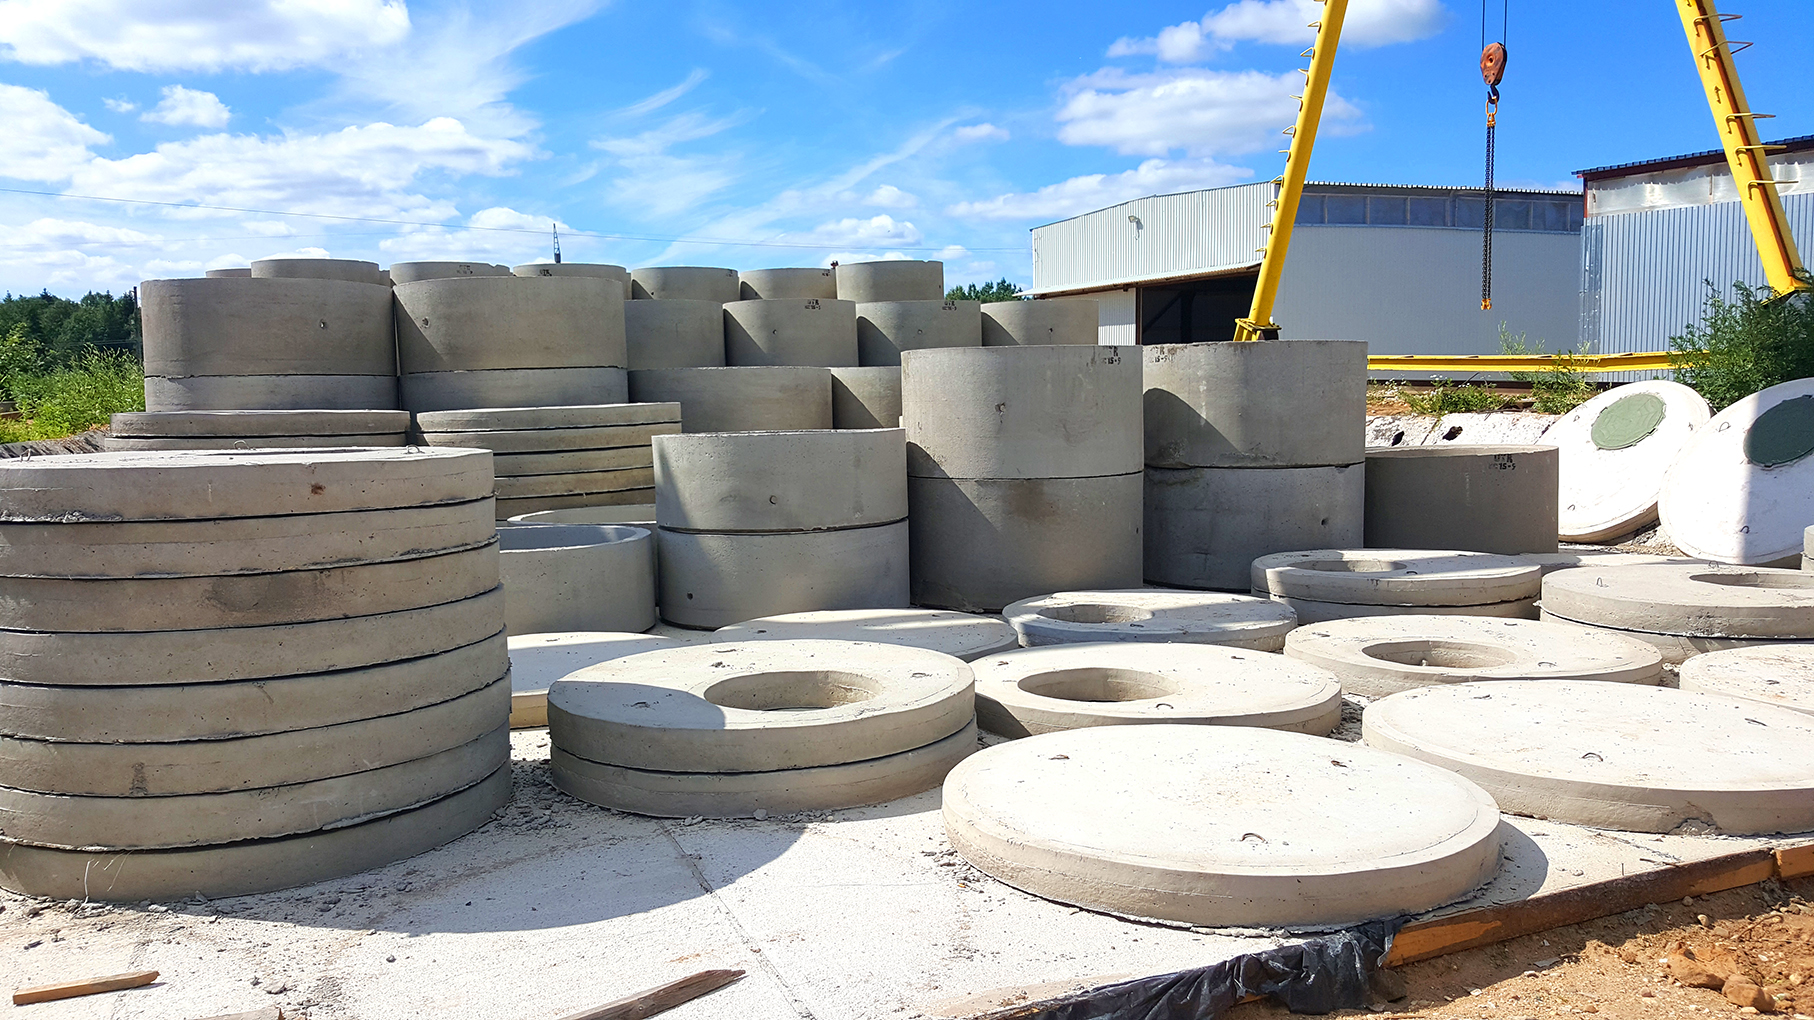 New Concrete Rings For Wells And Sewer On Construction Site Stock Photo -  Download Image Now - iStock